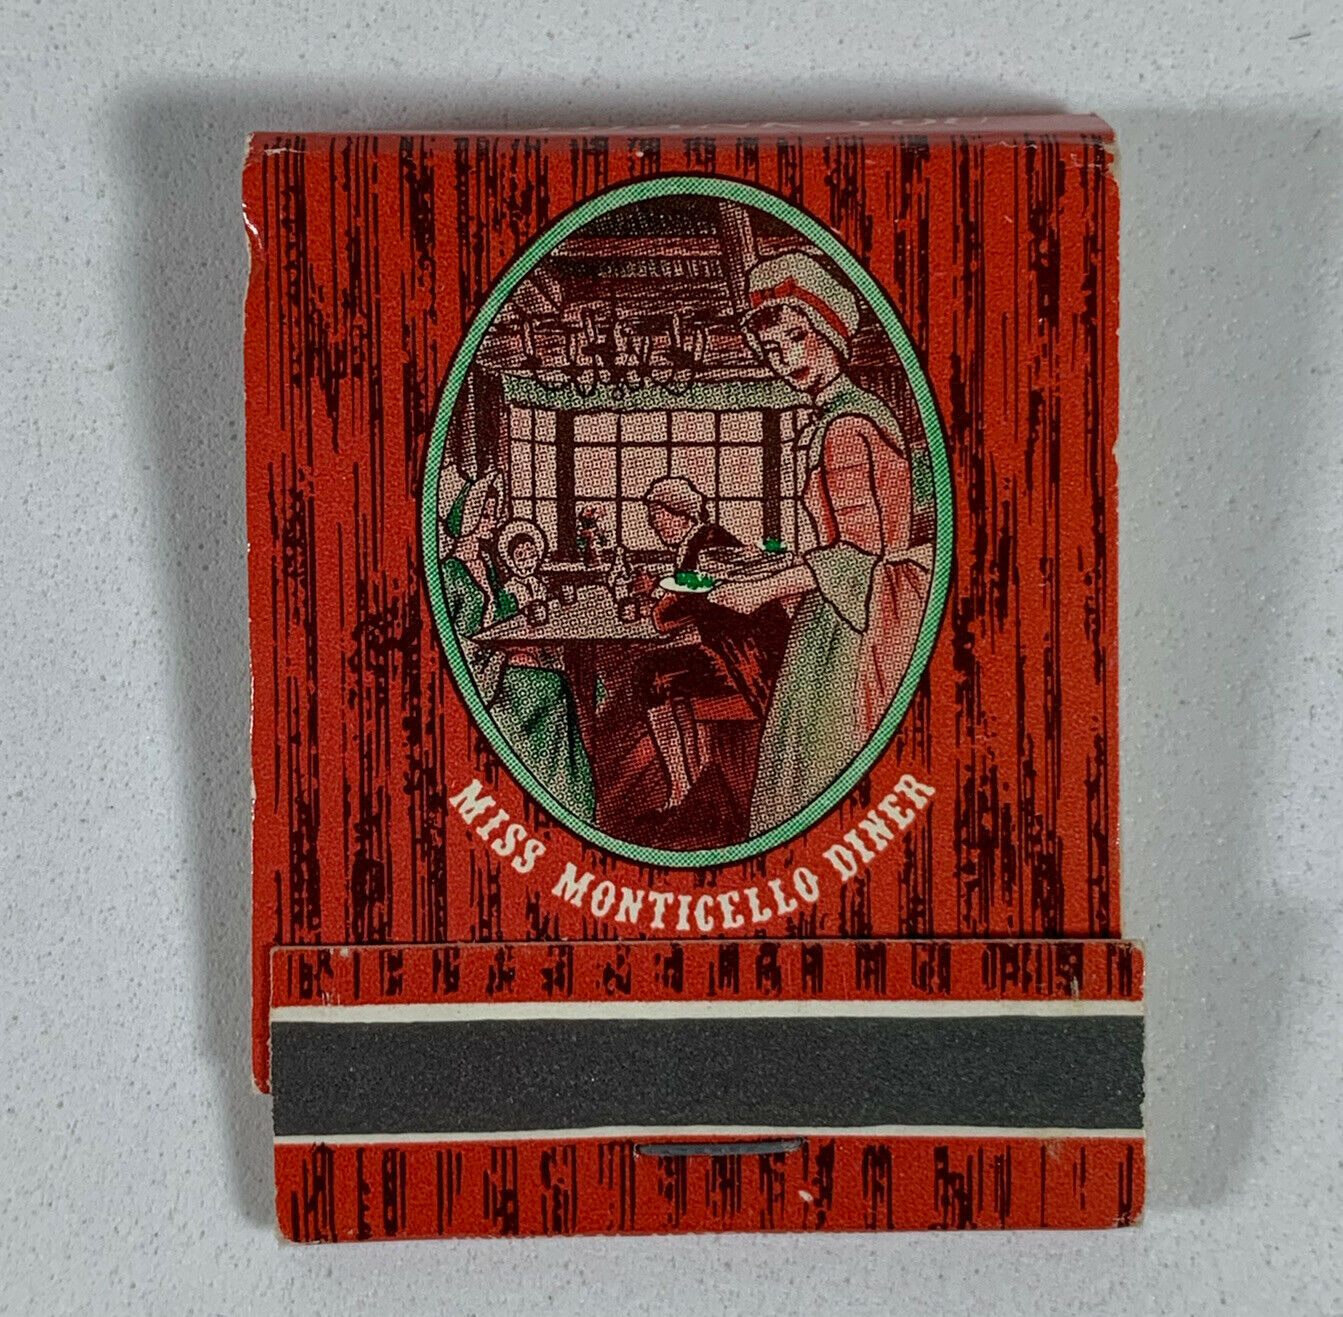 Vintage Miss Monticello Diner - Monticello Ny Matchbook, Unstruck Matches